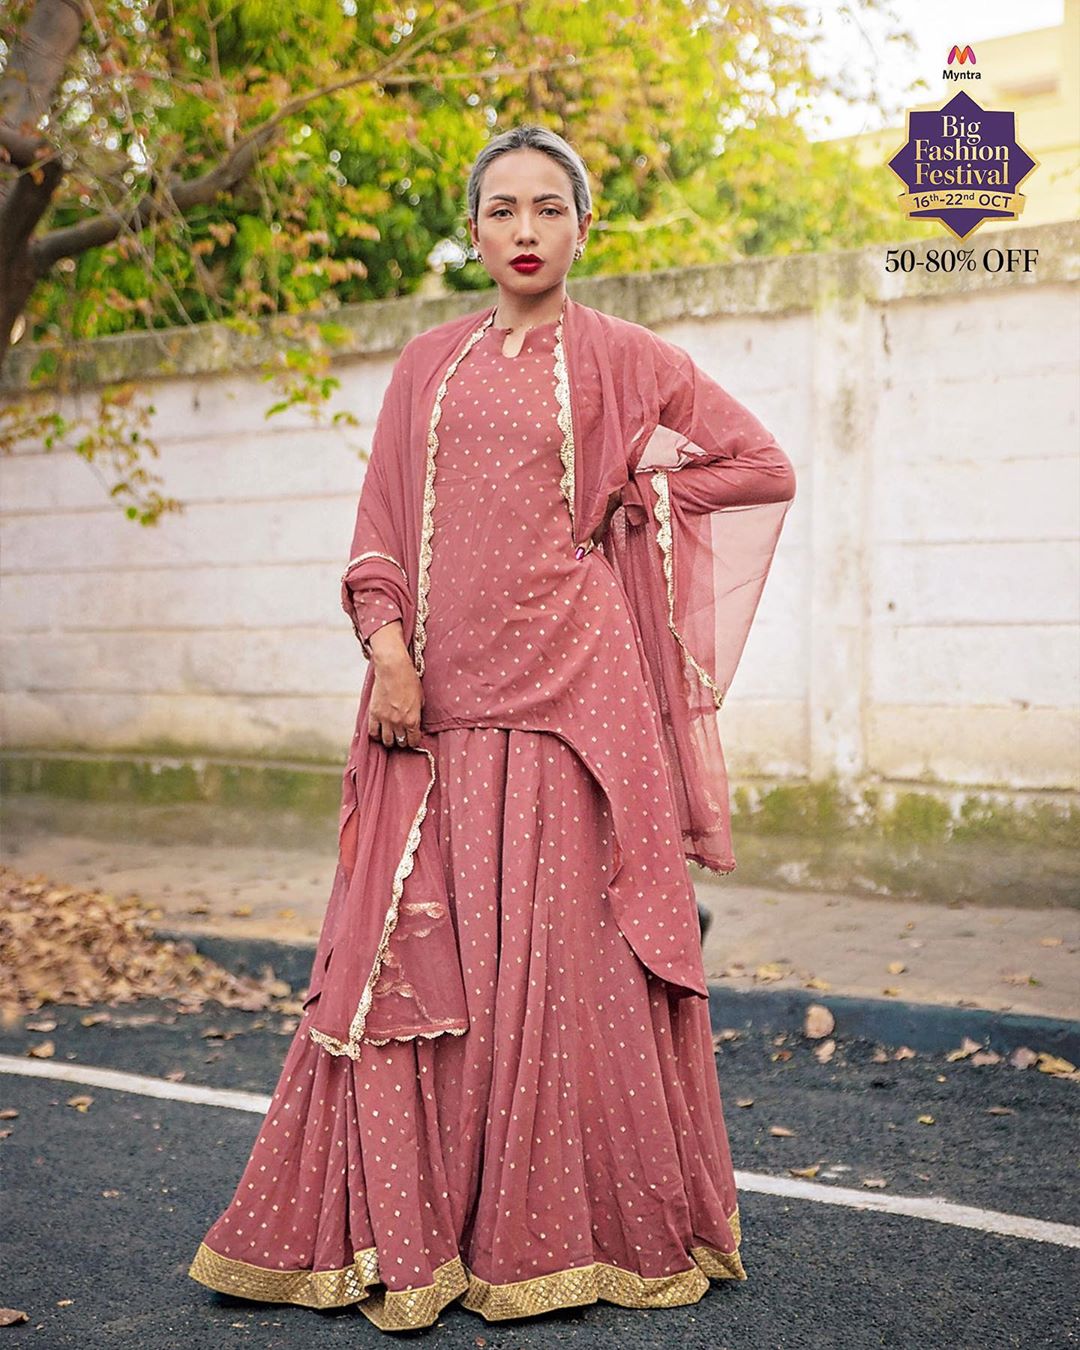 MYNTRA - India's Biggest Fashion Festival has arrived! 16th - 22nd Oct. @bighairloudmouth  is ready for the Myntra Big Fashion Festival.
100% Fashion. Up To 80% Off.
Stay tuned!
Look up similar produc...